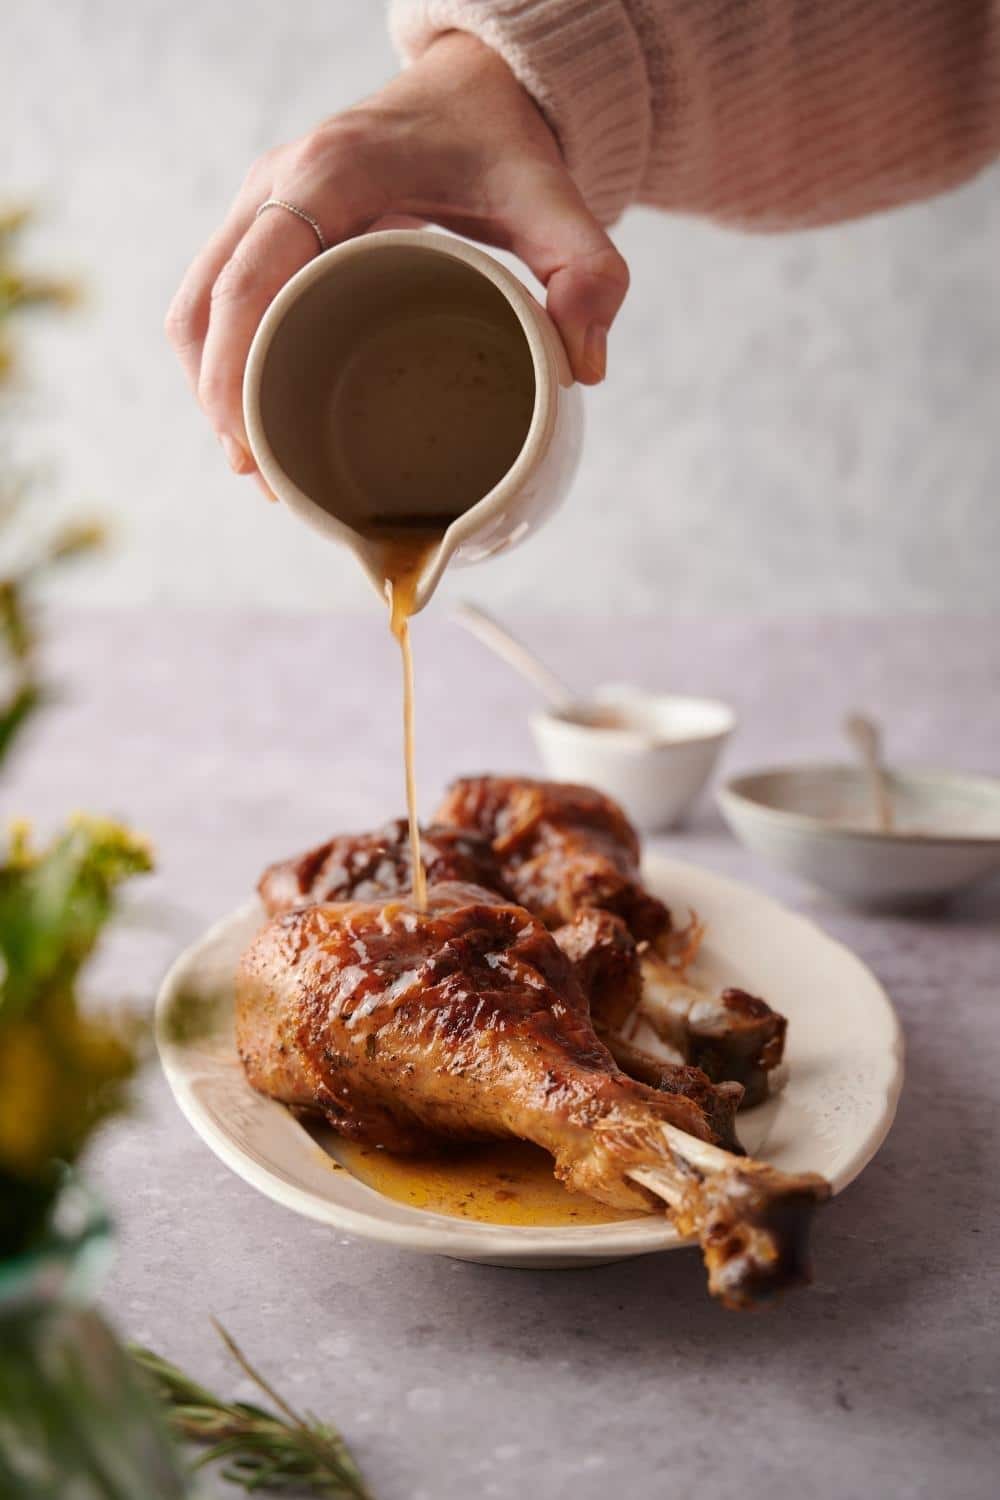 A small ceramic pitcher of golden cooking juices being poured over roasted turkey legs on an oval plate.